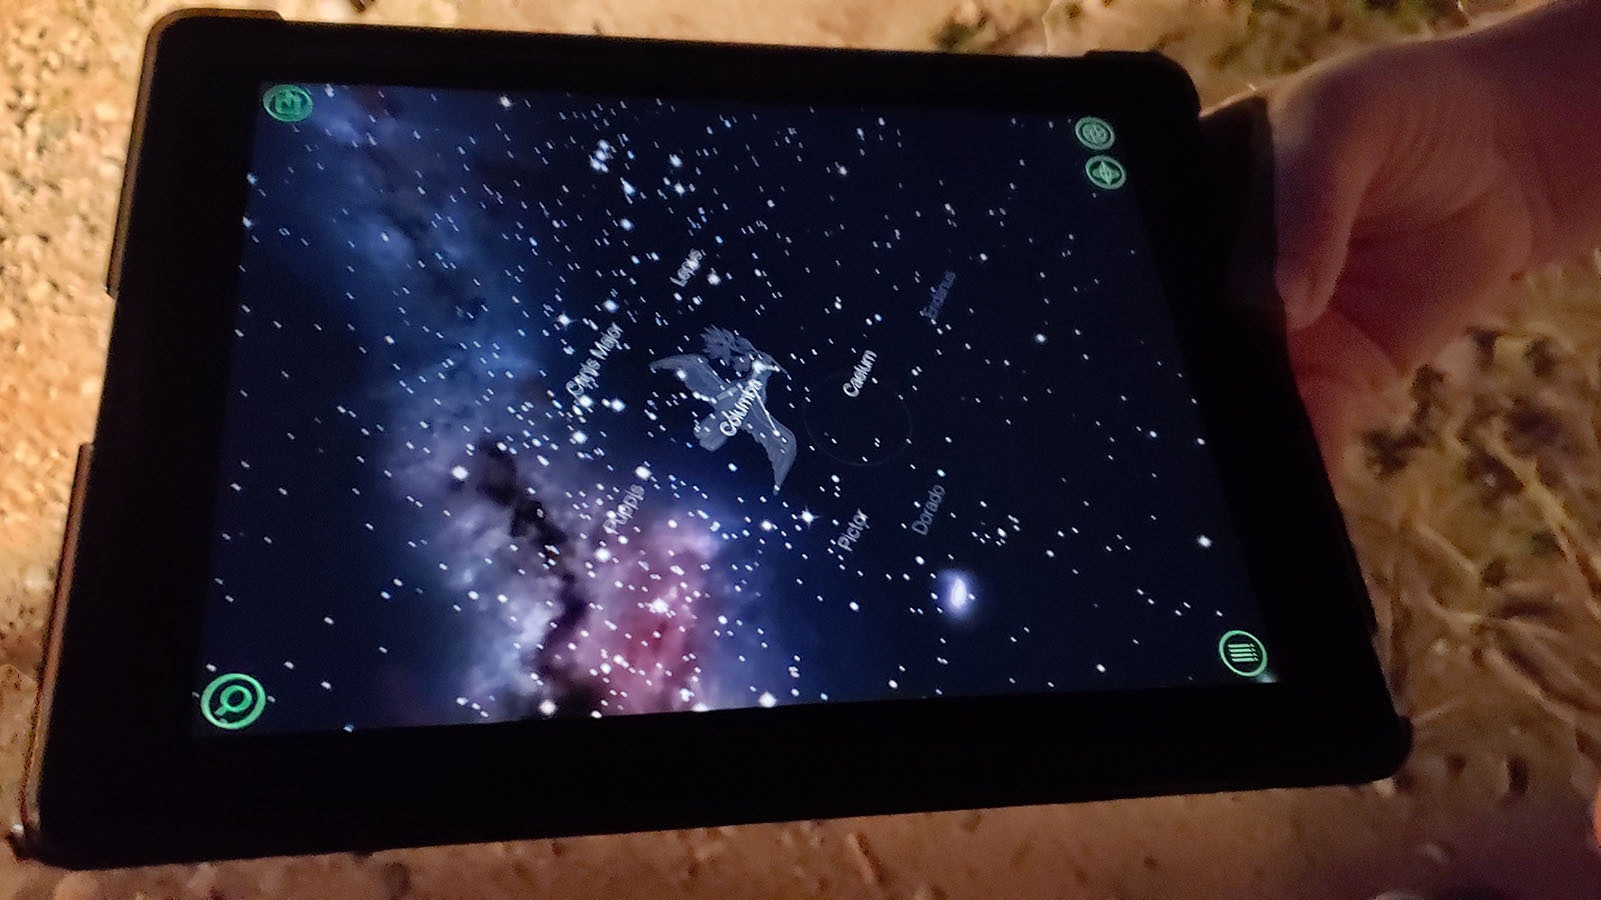 An iPad with an app that shows interesting things in whatever piece of sky its being pointed at. In this case since it's pointing at the ground and showing the starscape over China.